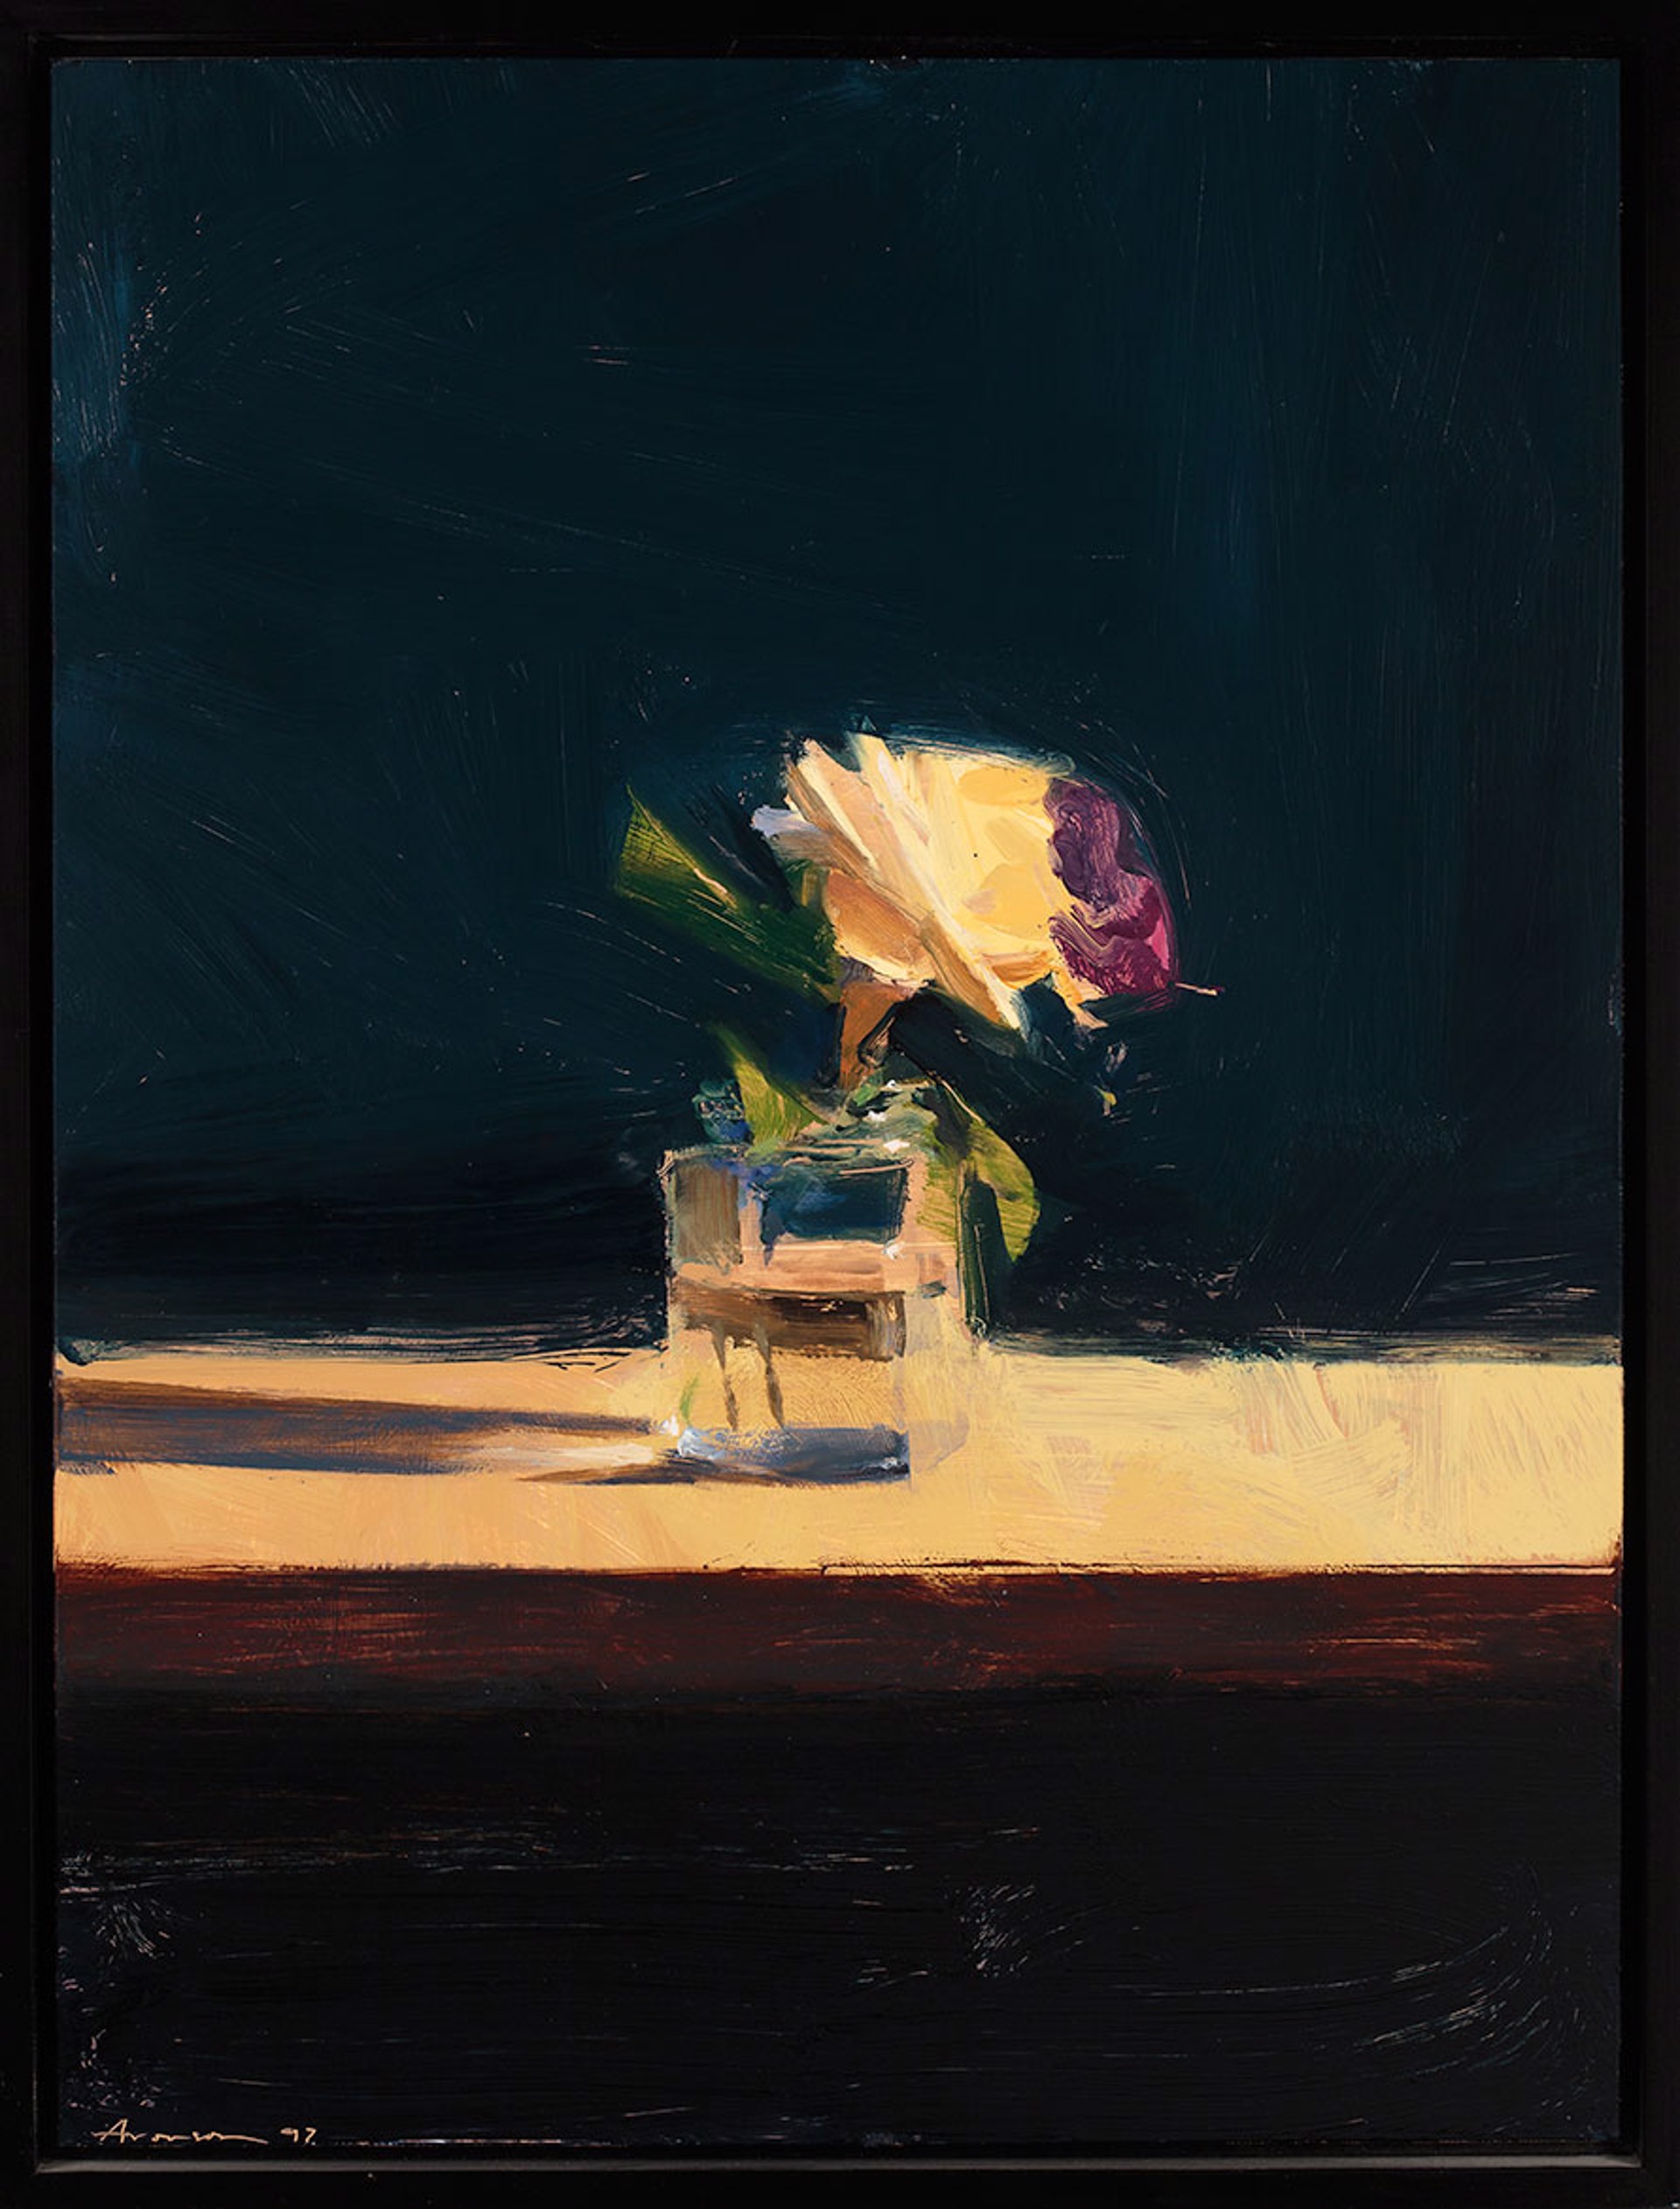 Flowers in Glass by Ben Aronson